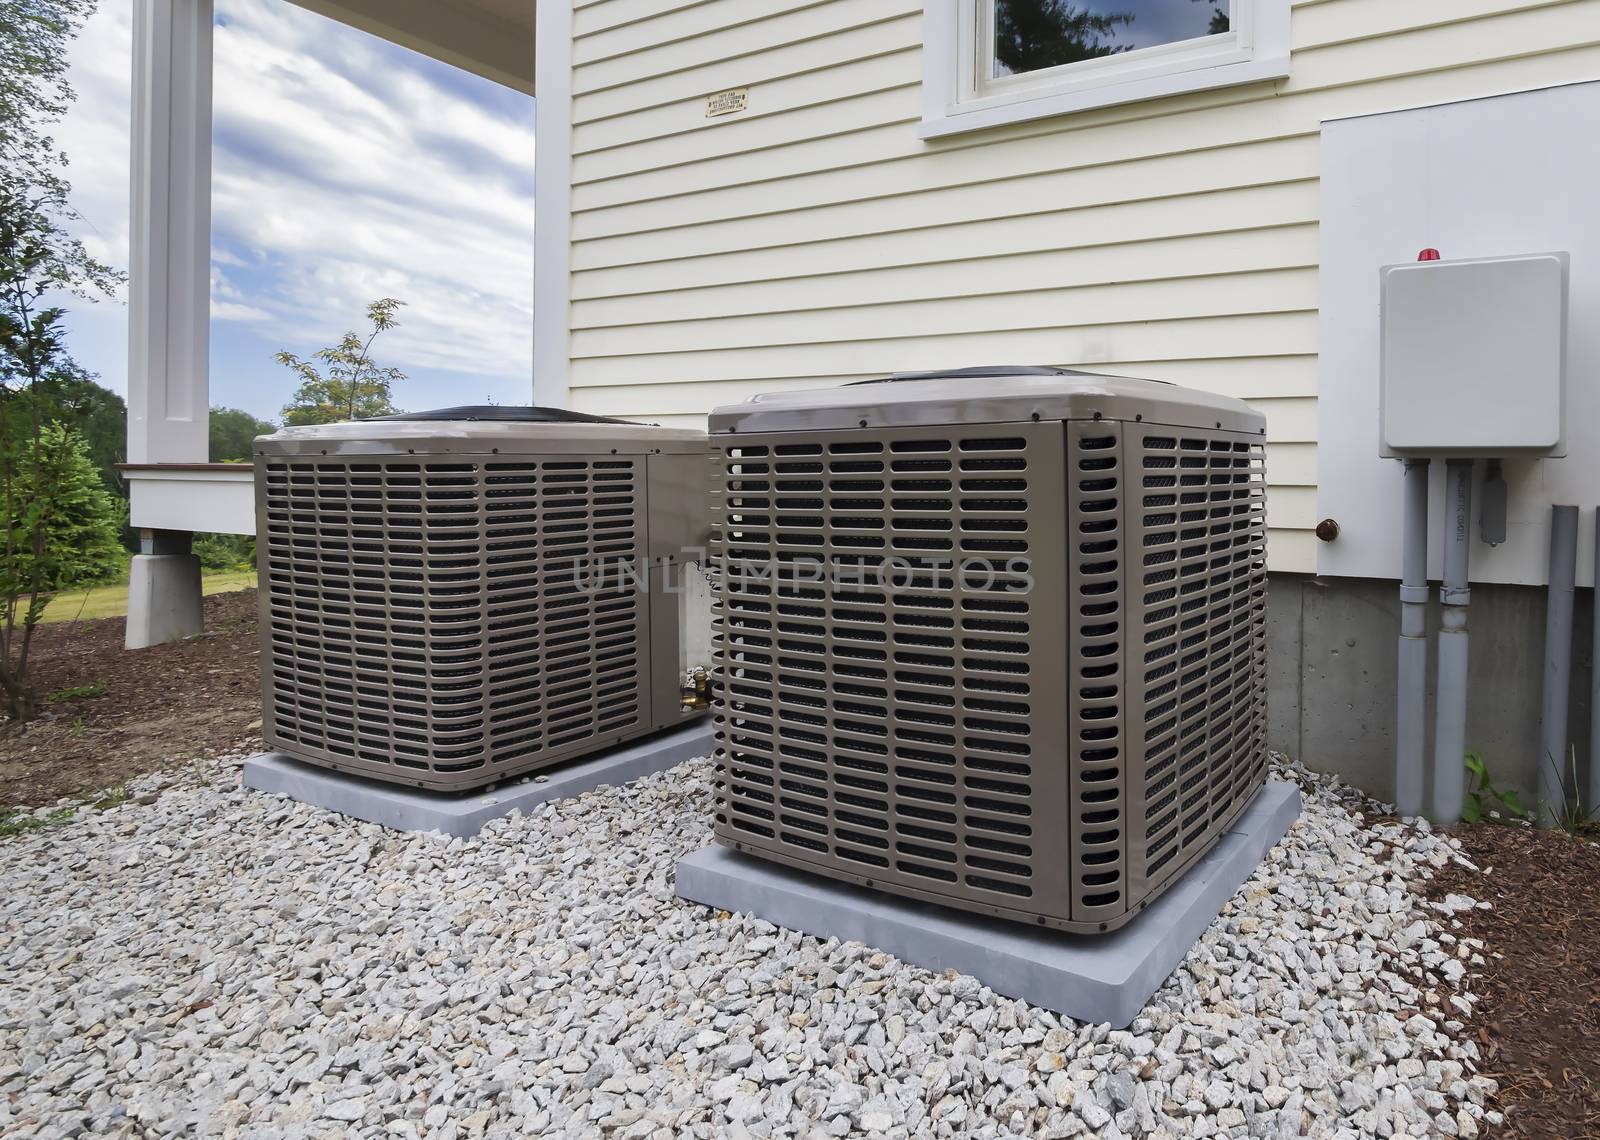 Heating and air conditioning units by f/2sumicron